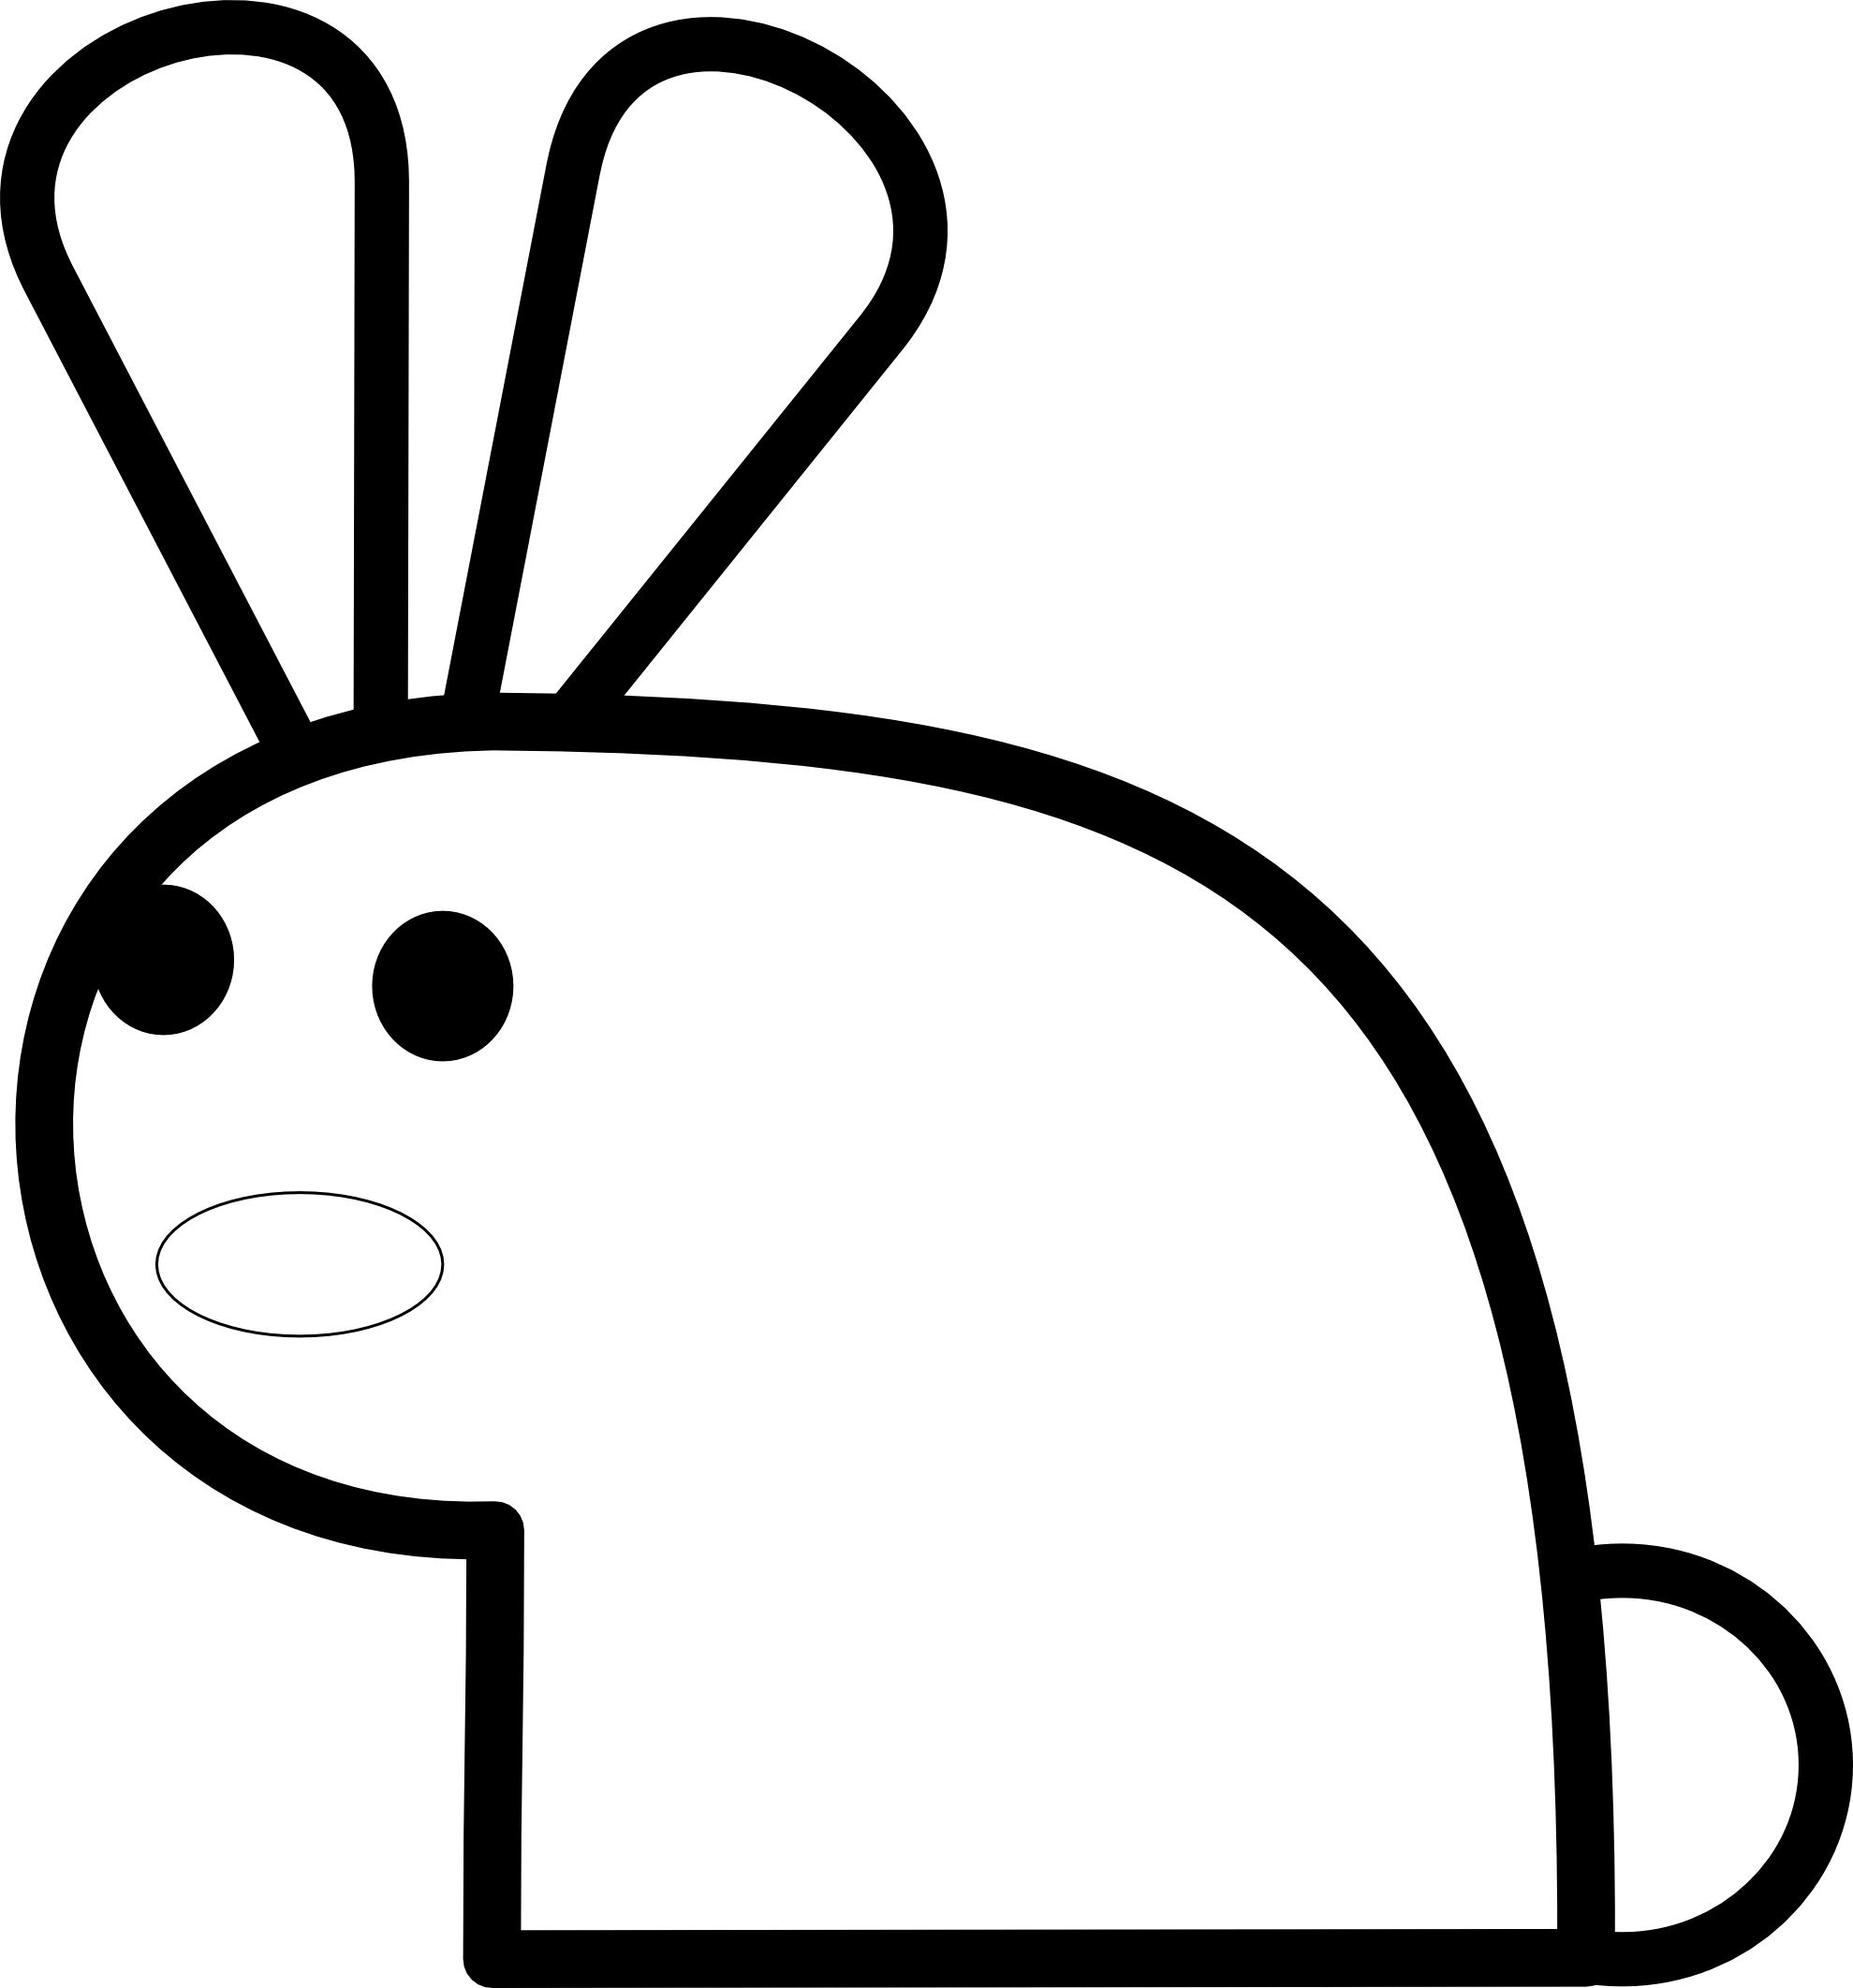 Rabbit  black and white bunny clipart black and white free images 5